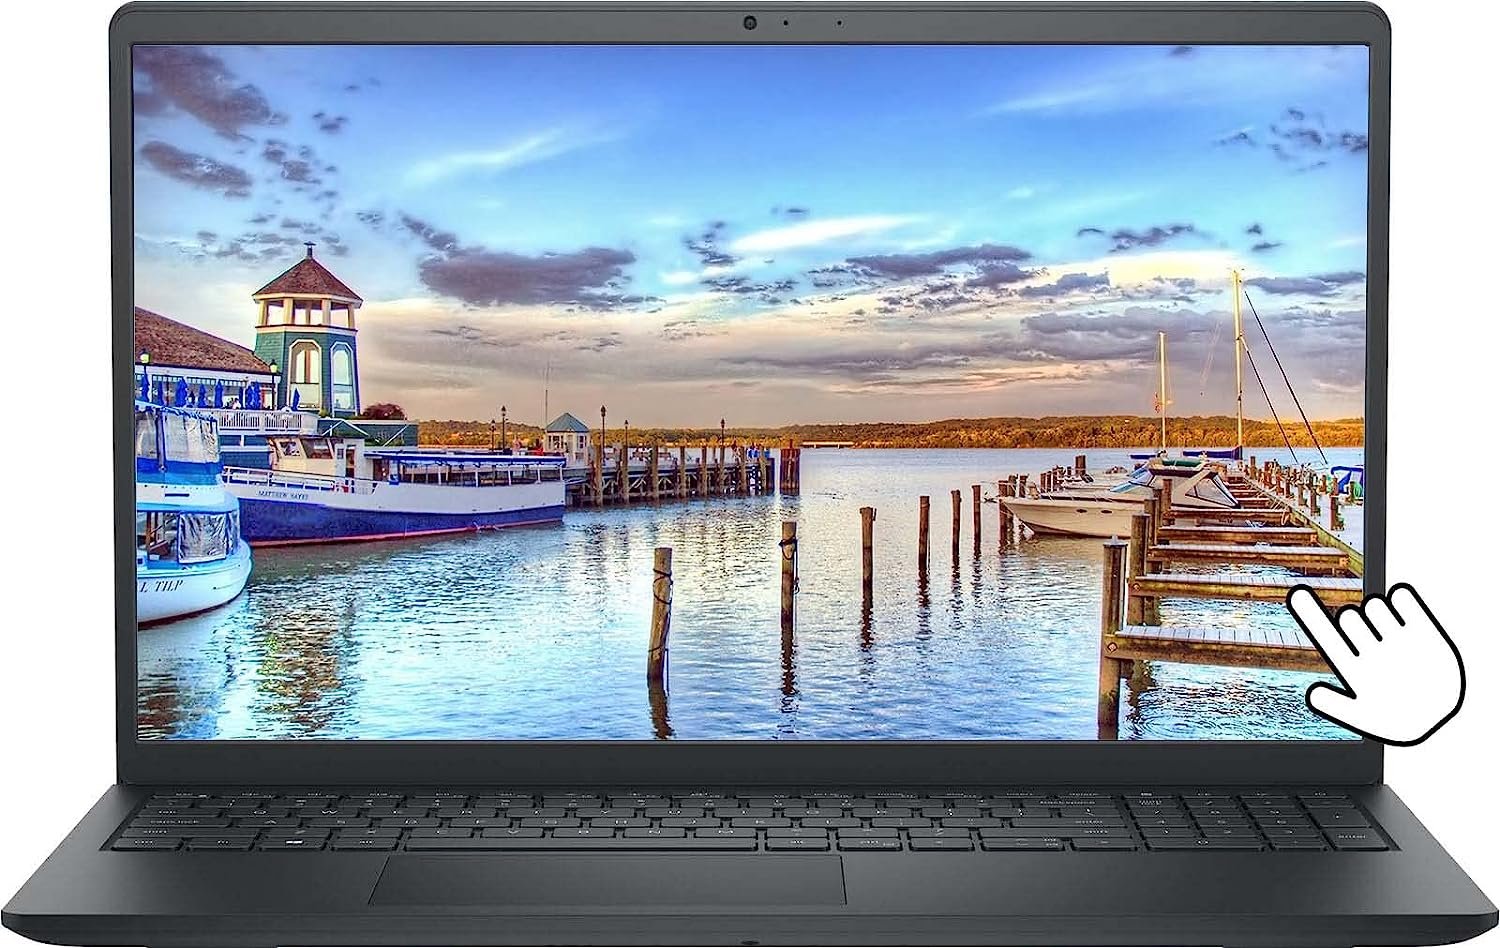 2022 Newest Dell Inspiron 15.6" FHD Touchscreen Laptop